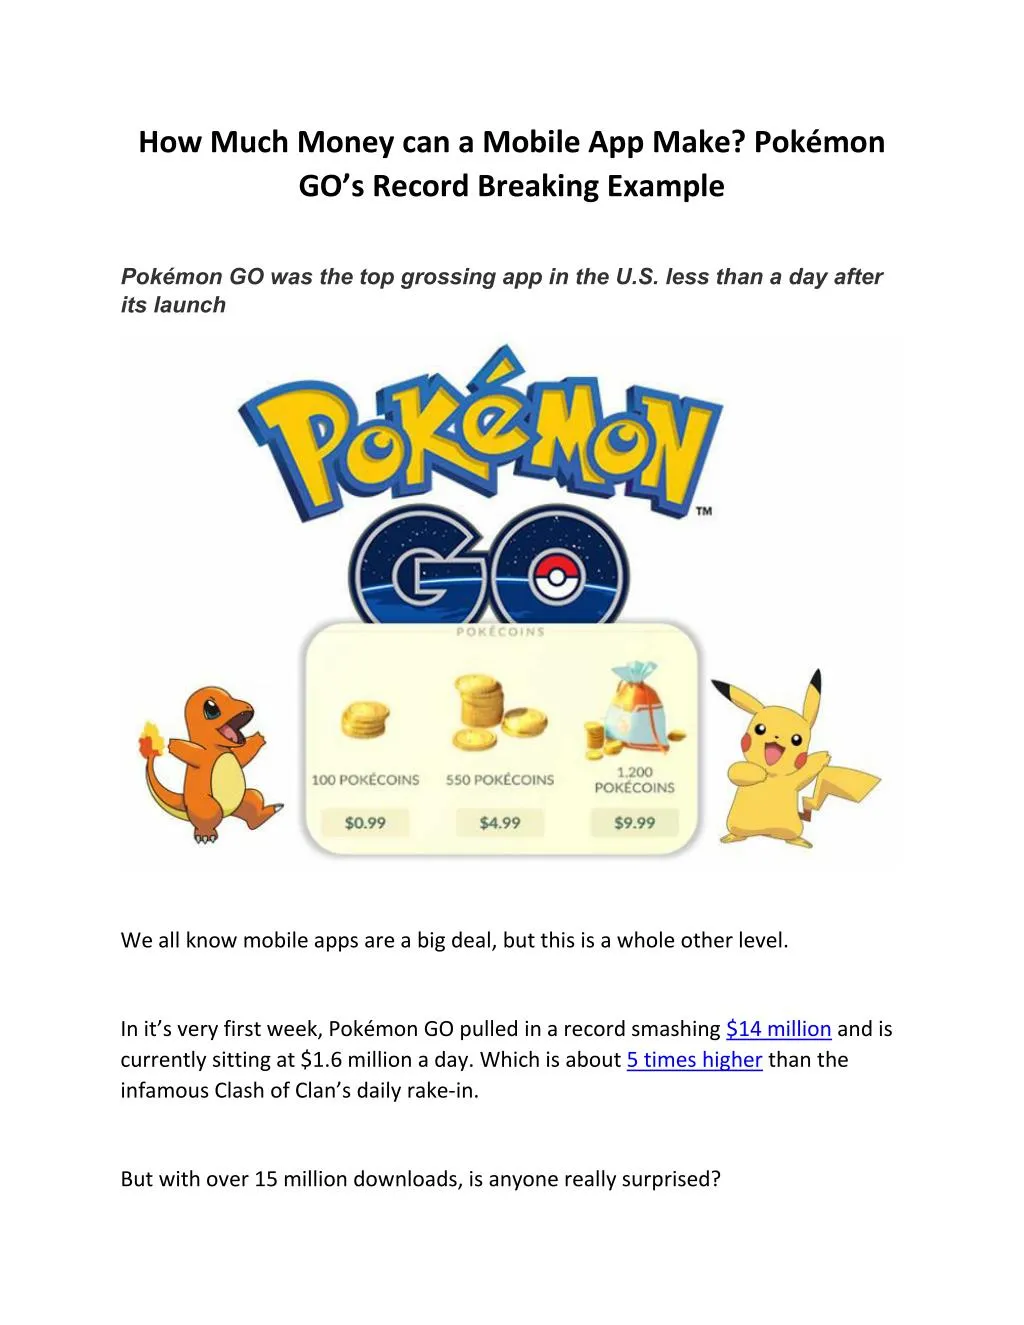 Download Pokemon Go from the app store